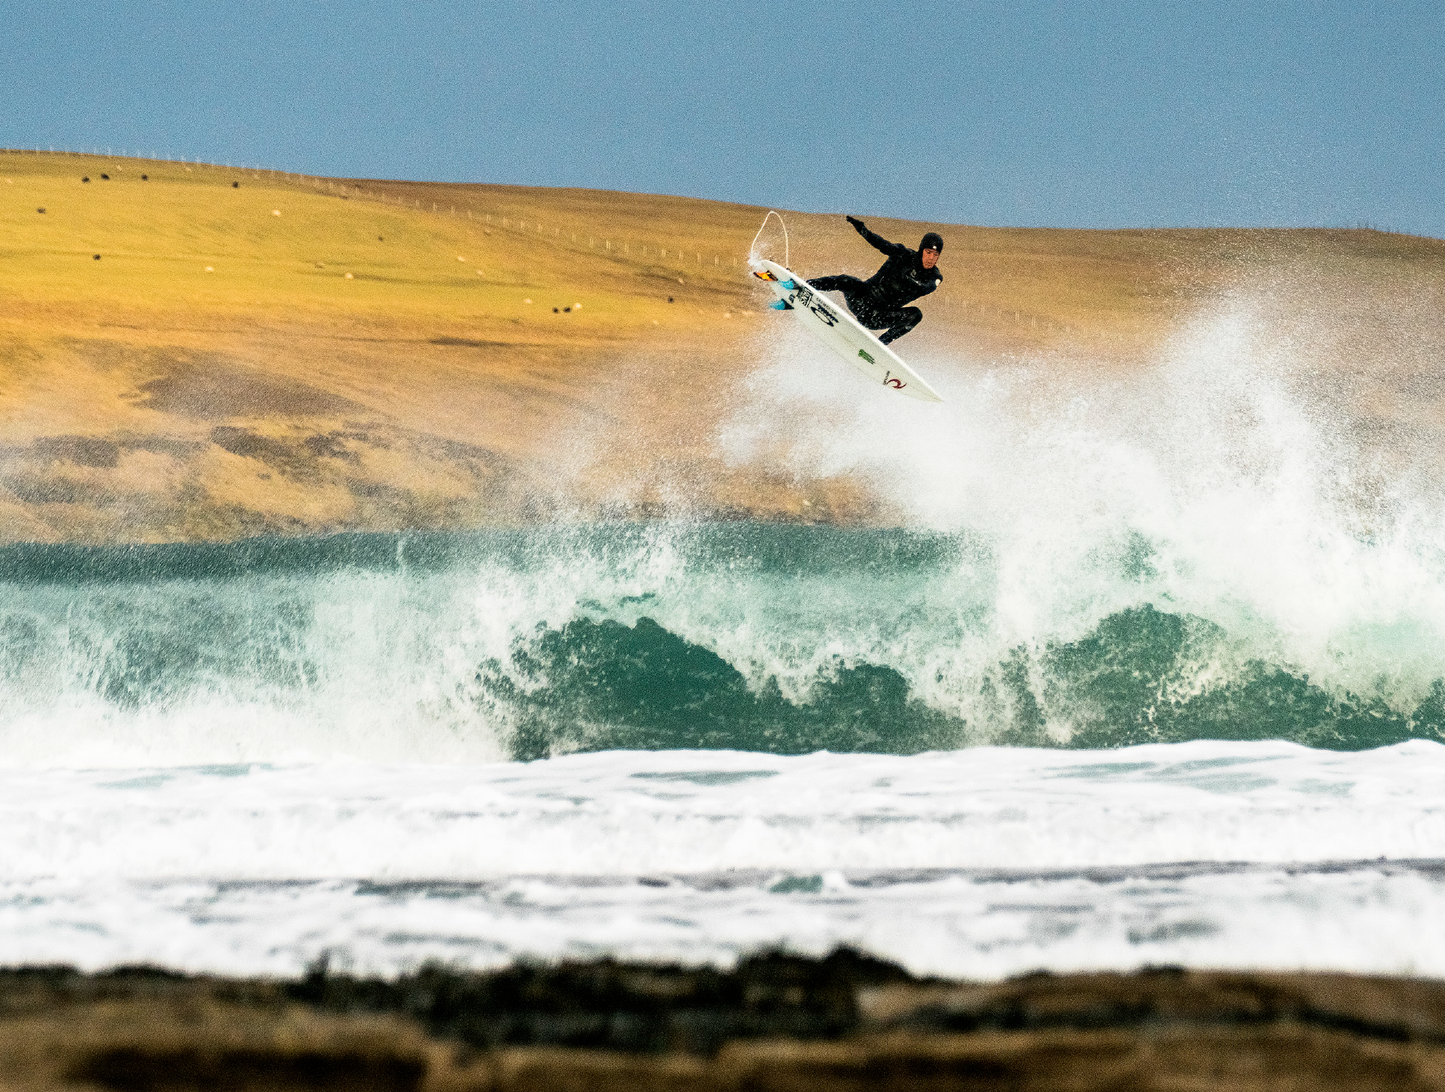 Alba- A photo book by Mark McInnis- Surfer getting an air with a rolling hillside in the background